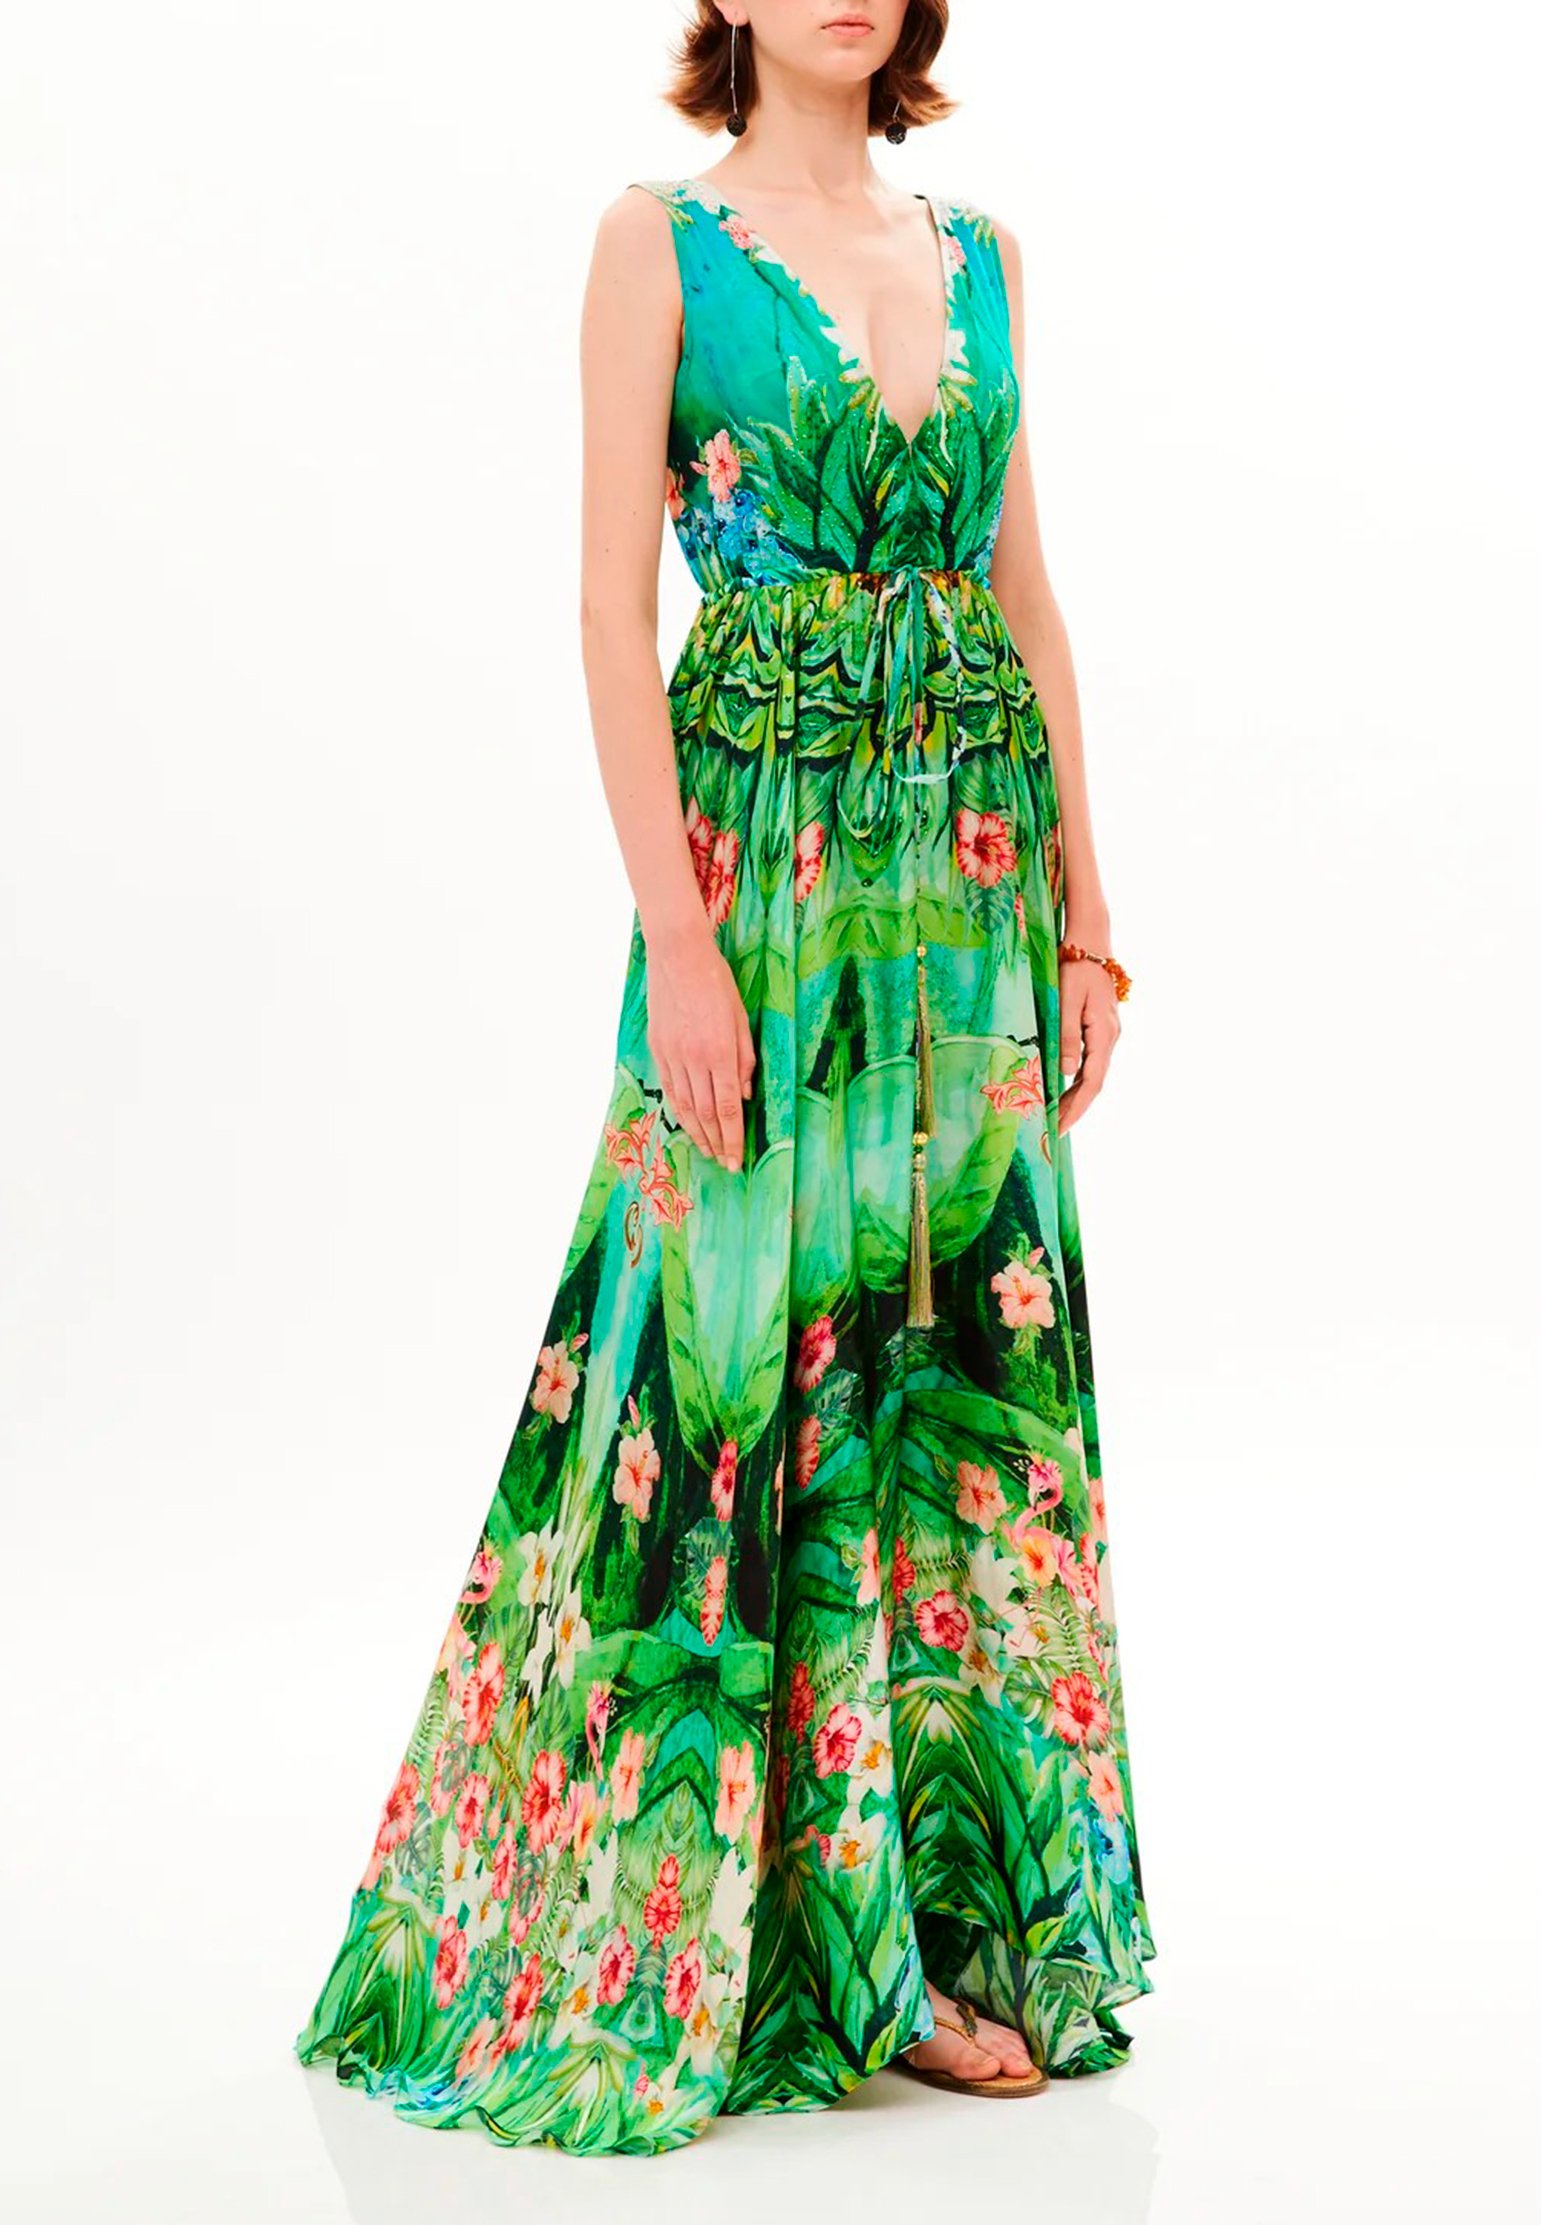 Dress KORE' COLLECTIONS Color: green (Code: 2299) in online store Allure